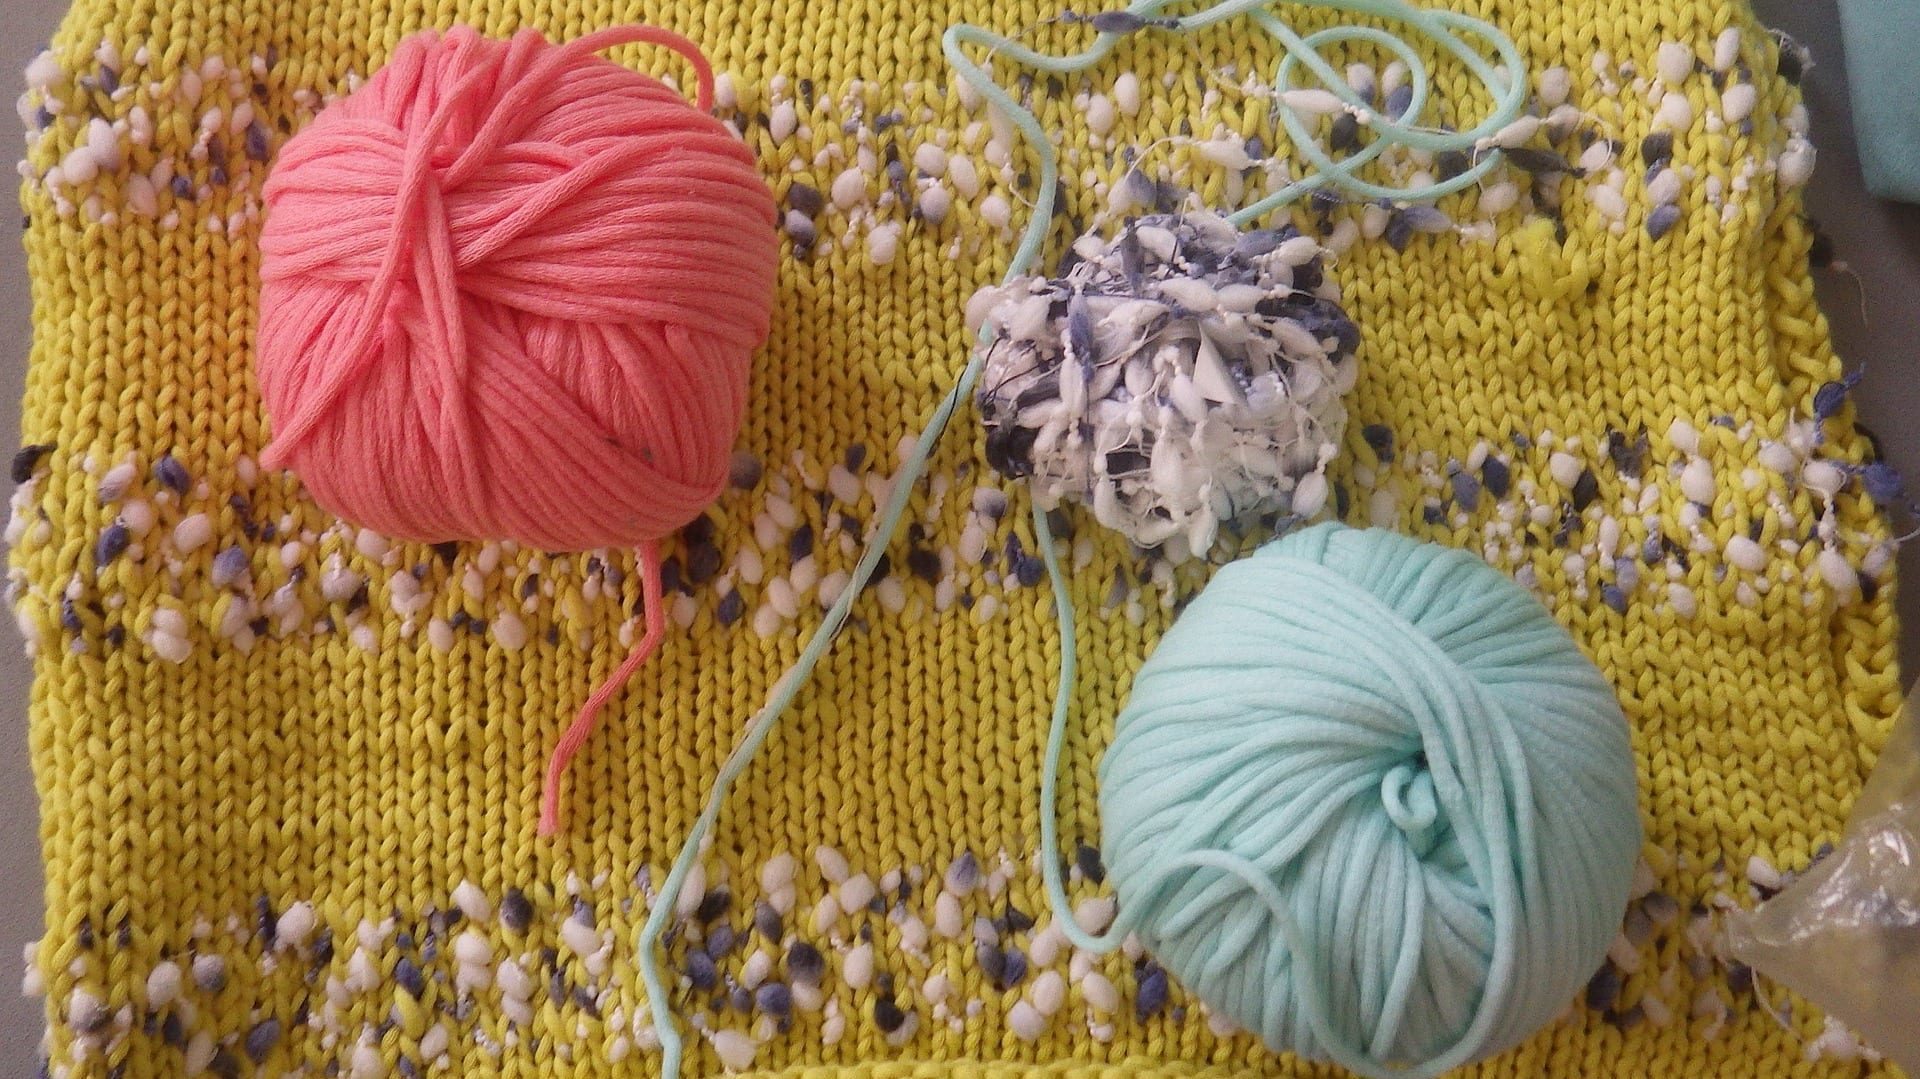 A piece of knitting is in the background. It's yellow with stripes of textured white and grey stripes. The ball of white and grey textured yarn sits on top of the knitting along side a ball of coral yarn and a ball of pale turquoise.